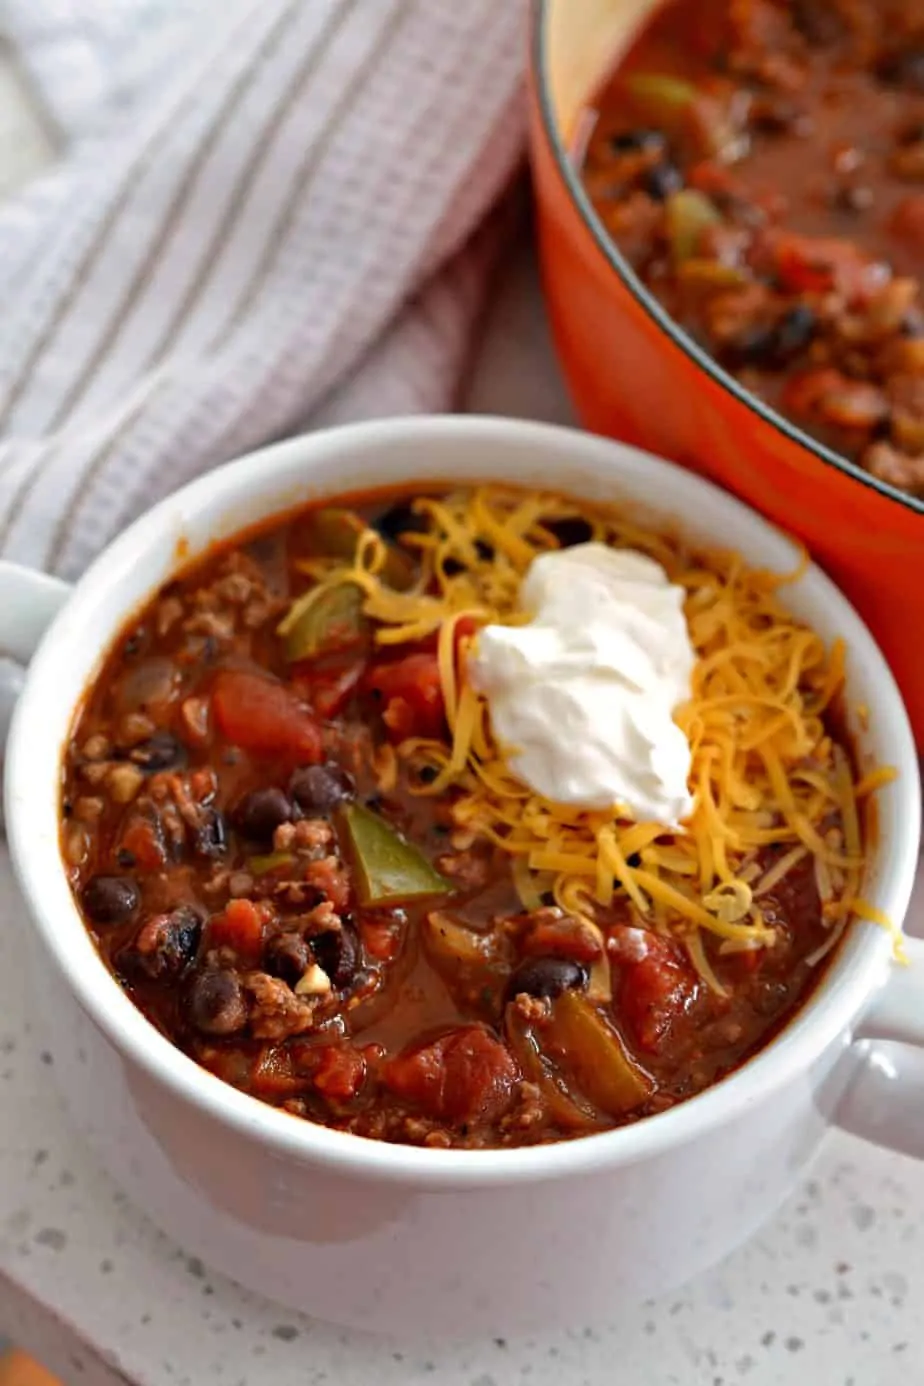 Nothing better than a big thick bowl of chili.  You know, the kind that is almost thick enough for your spoon to stand up. 